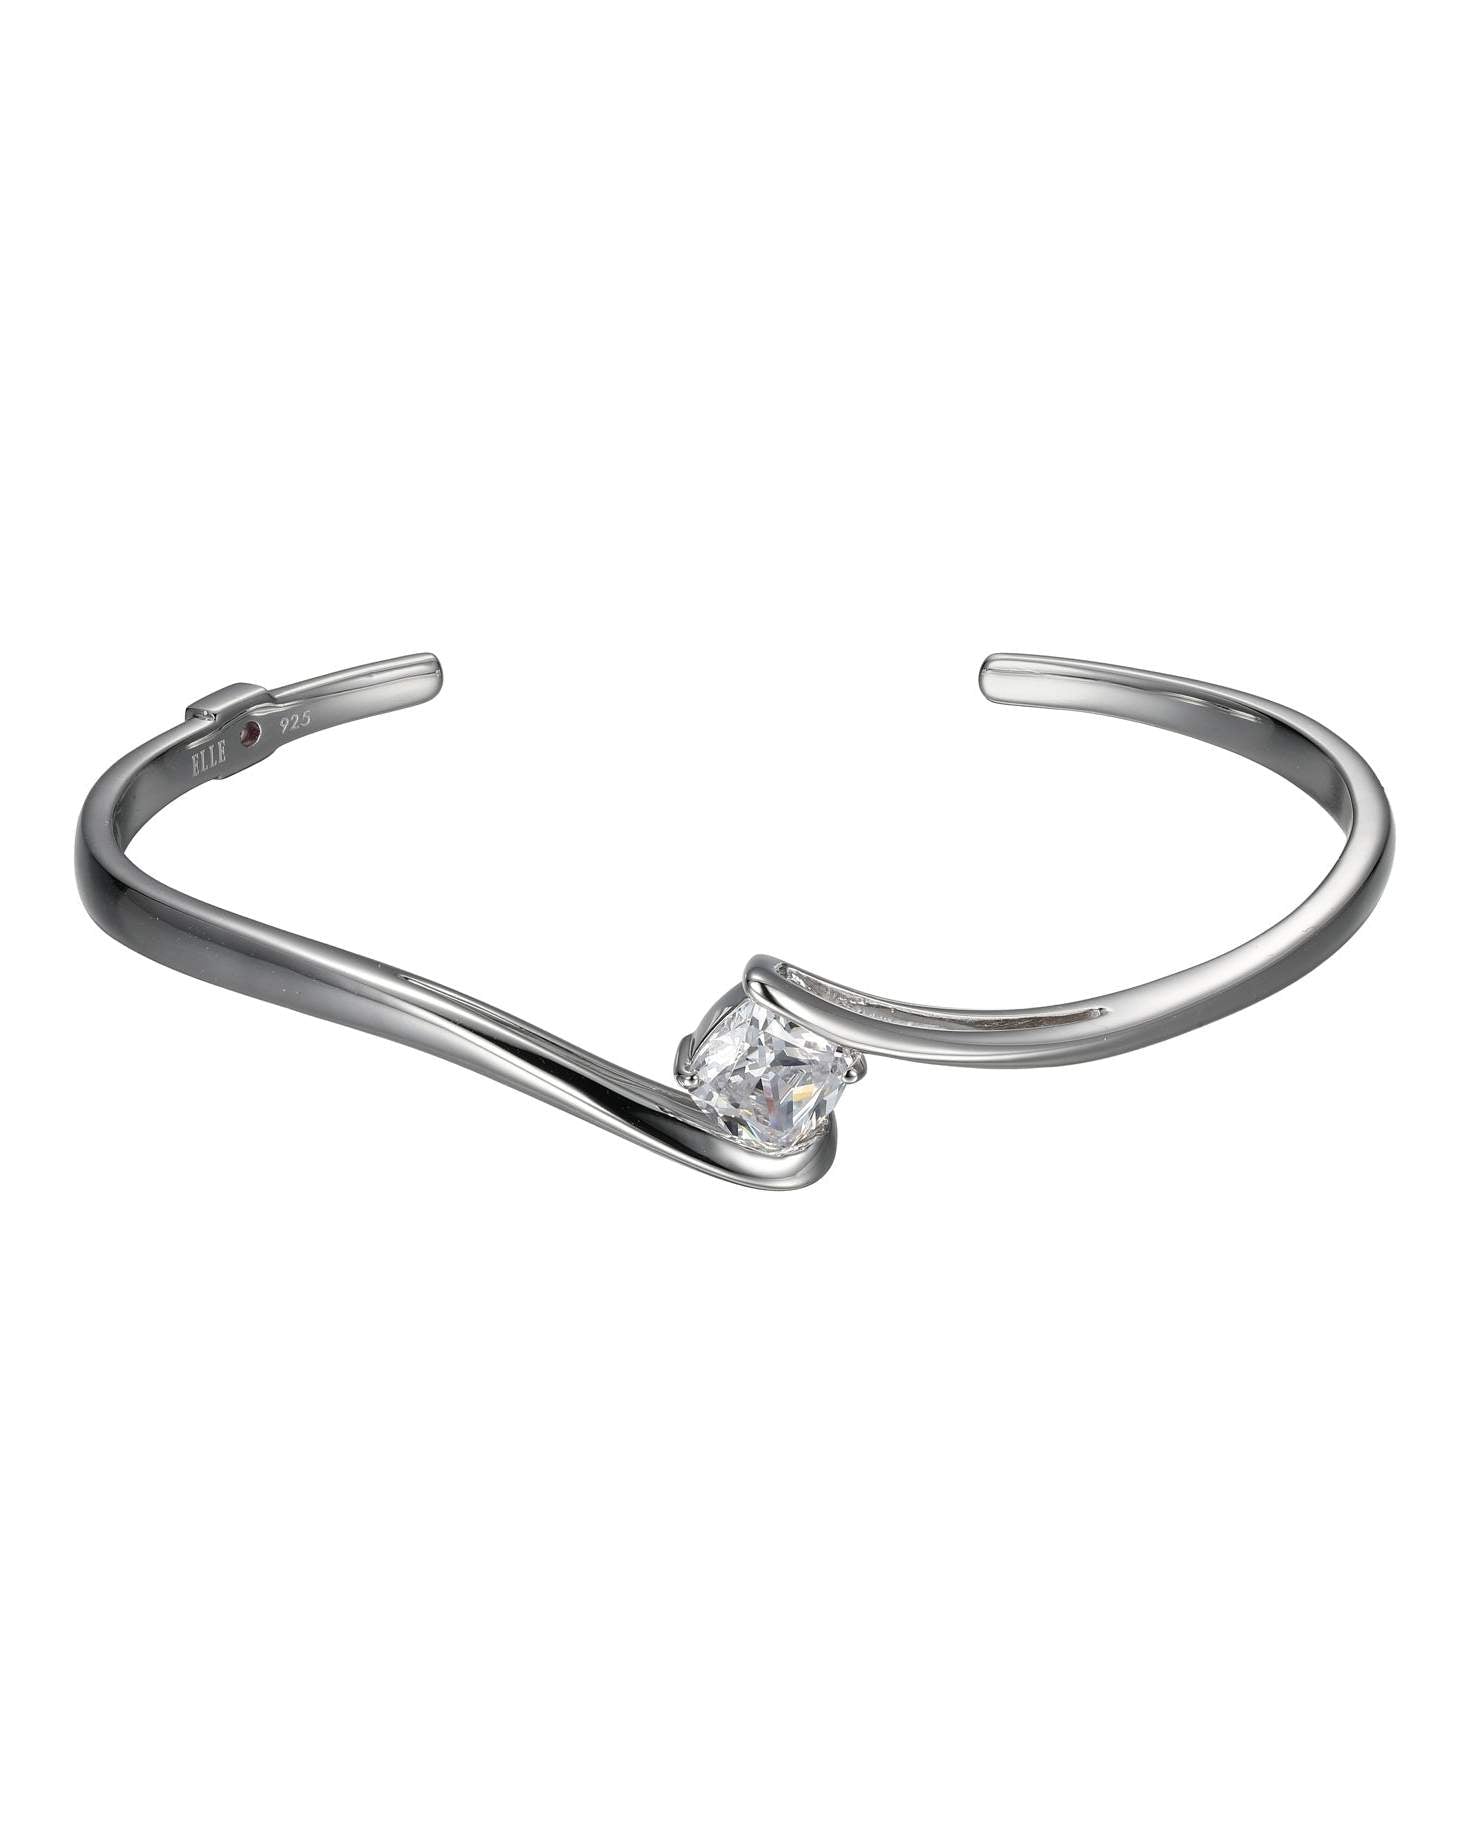 SS ELLE "PROMISE" 7MM CUSHION CZ OPEN CUFF IN RHODIUM PLATING. 6.75"